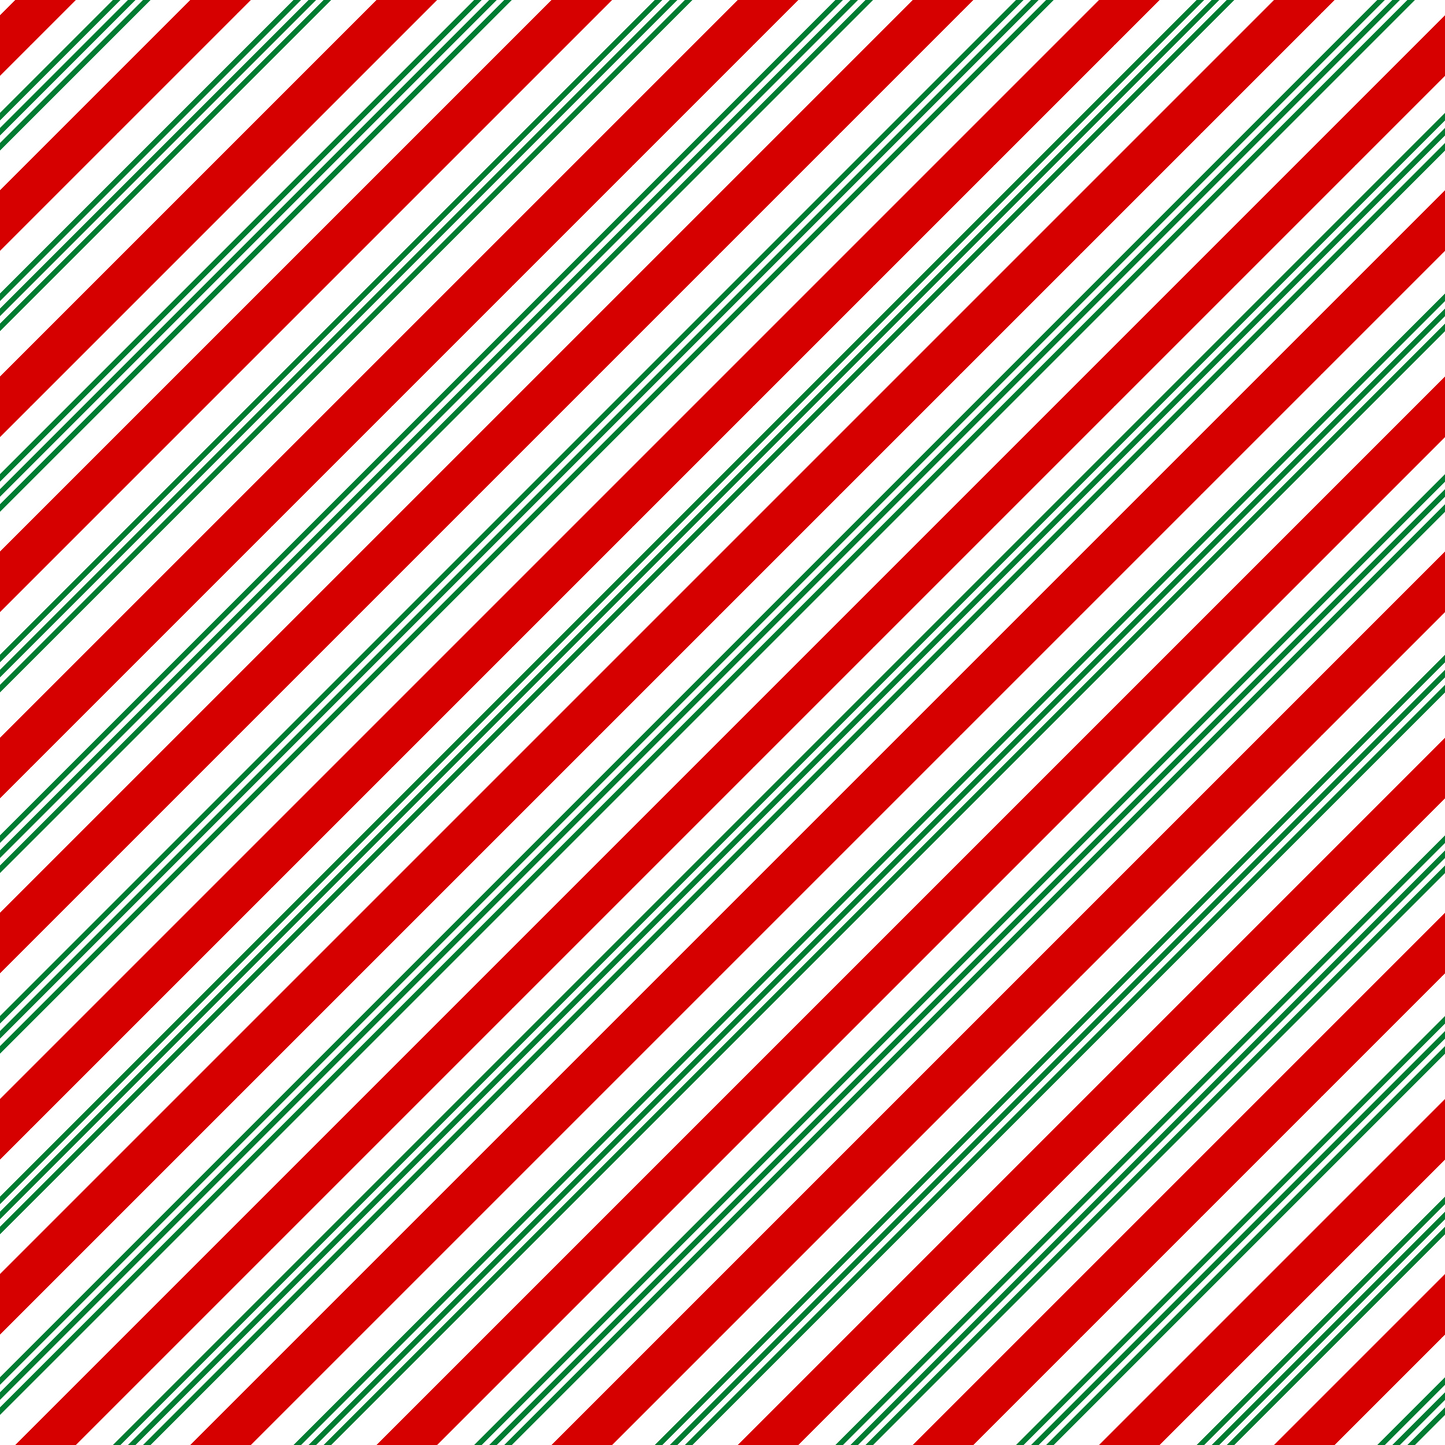 Candy Cane Stripes - Red and Green Stripes 004